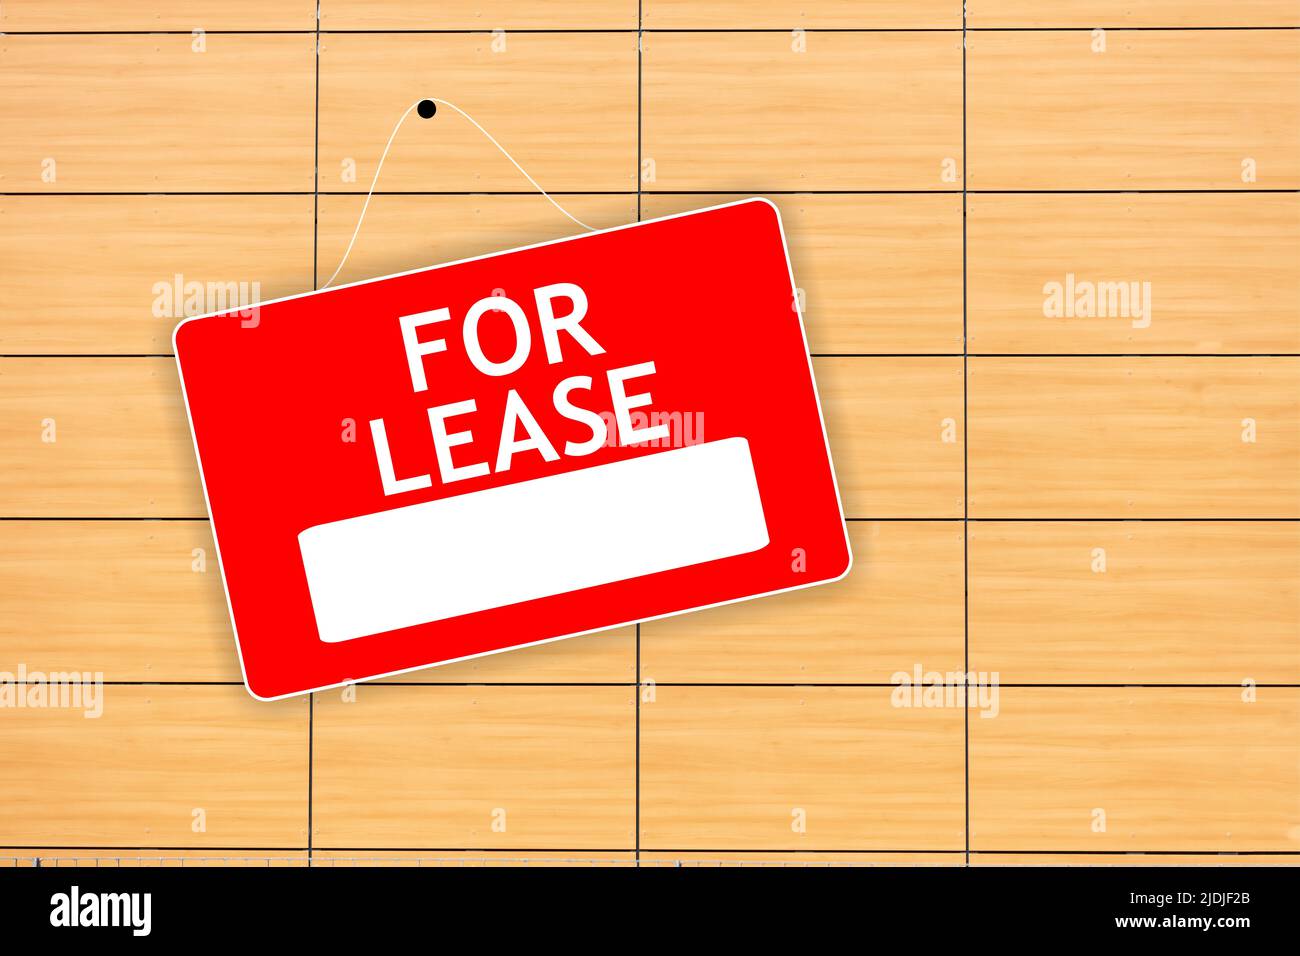 FOR LEASE red sign with white word and empty space for text on wooden background, advertising template. Label for real estate hiring hanged on wood de Stock Photo